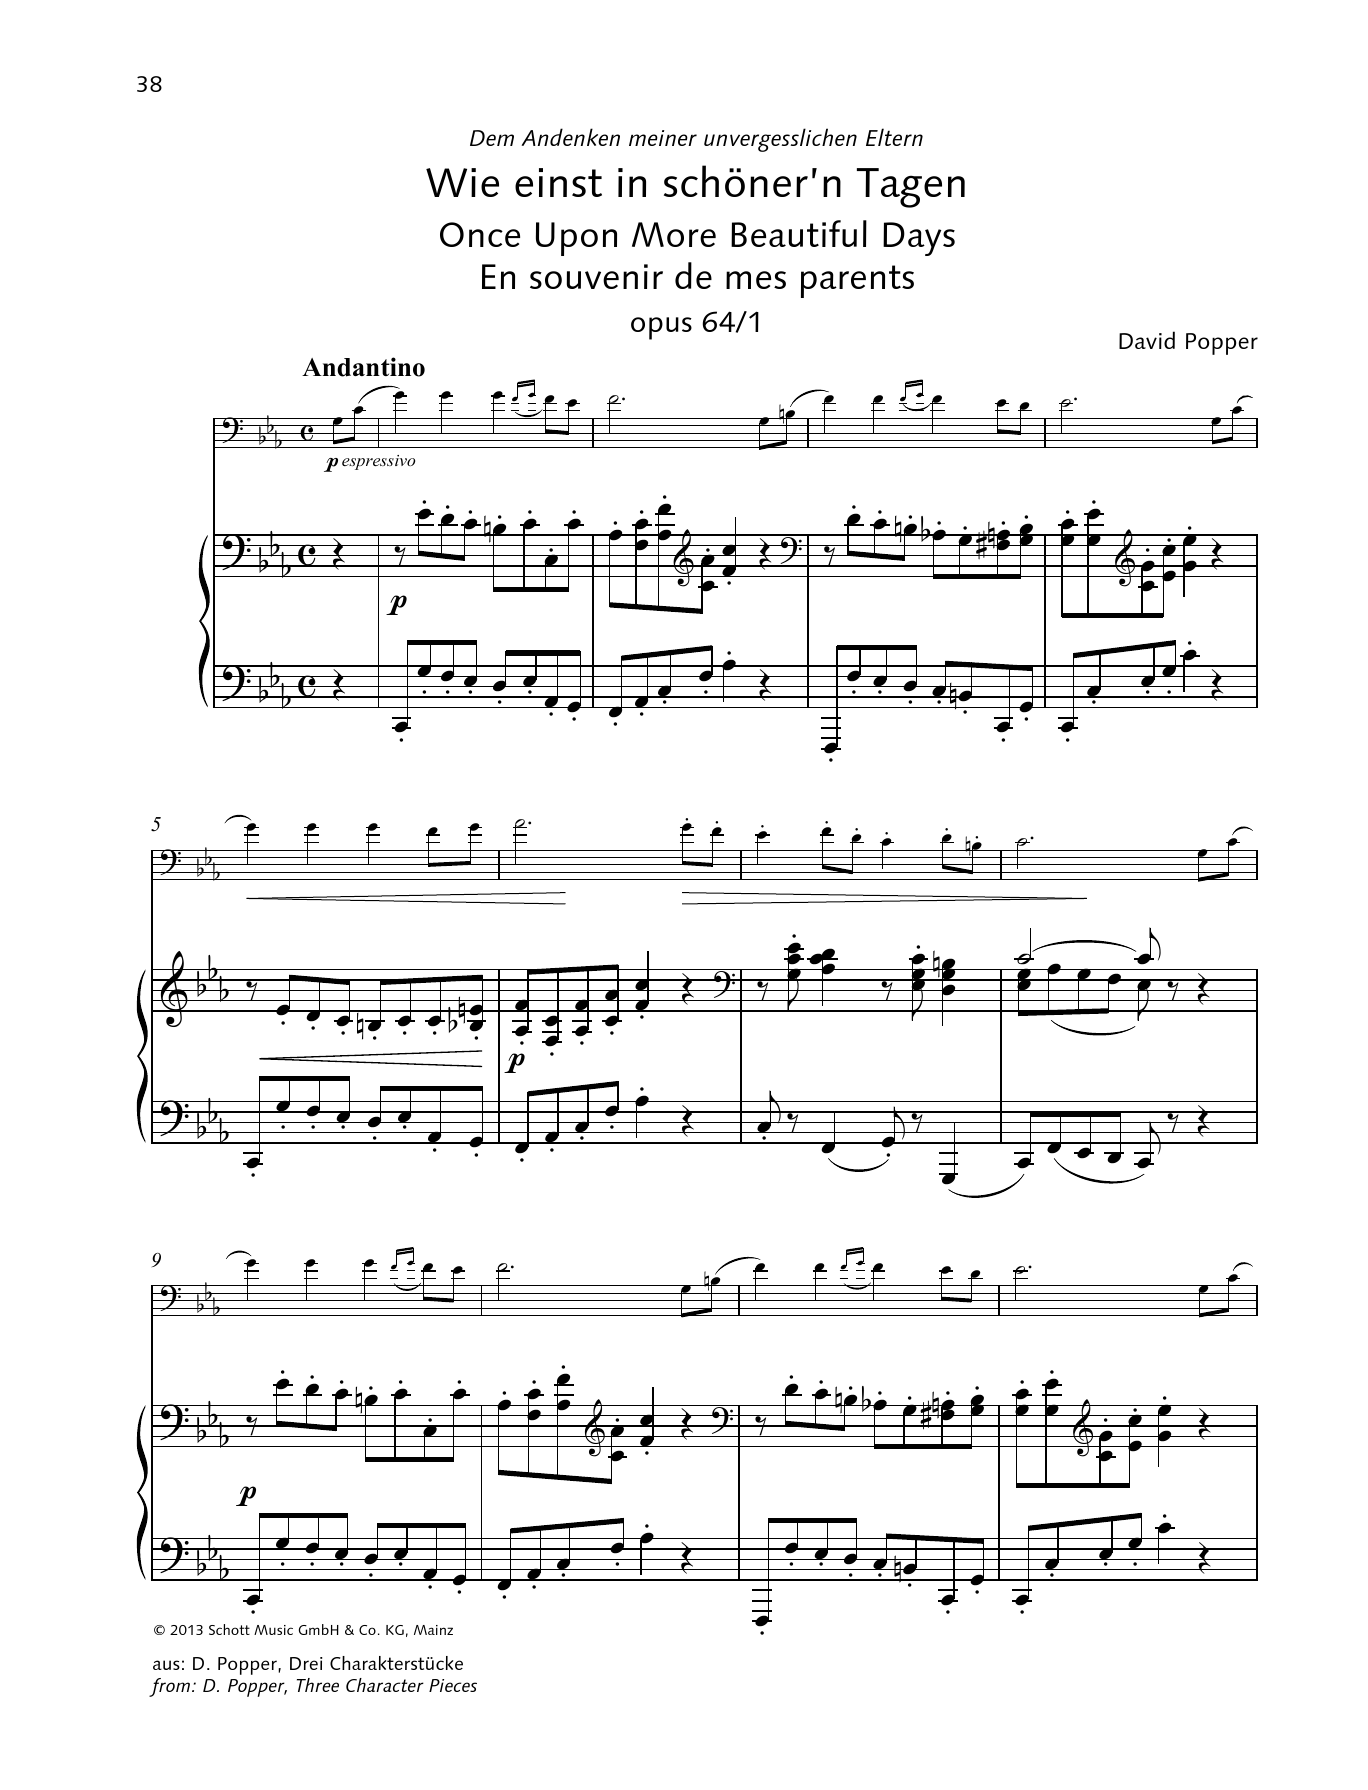 Download Dávid Popper Once Upon More Beautiful Days Sheet Music